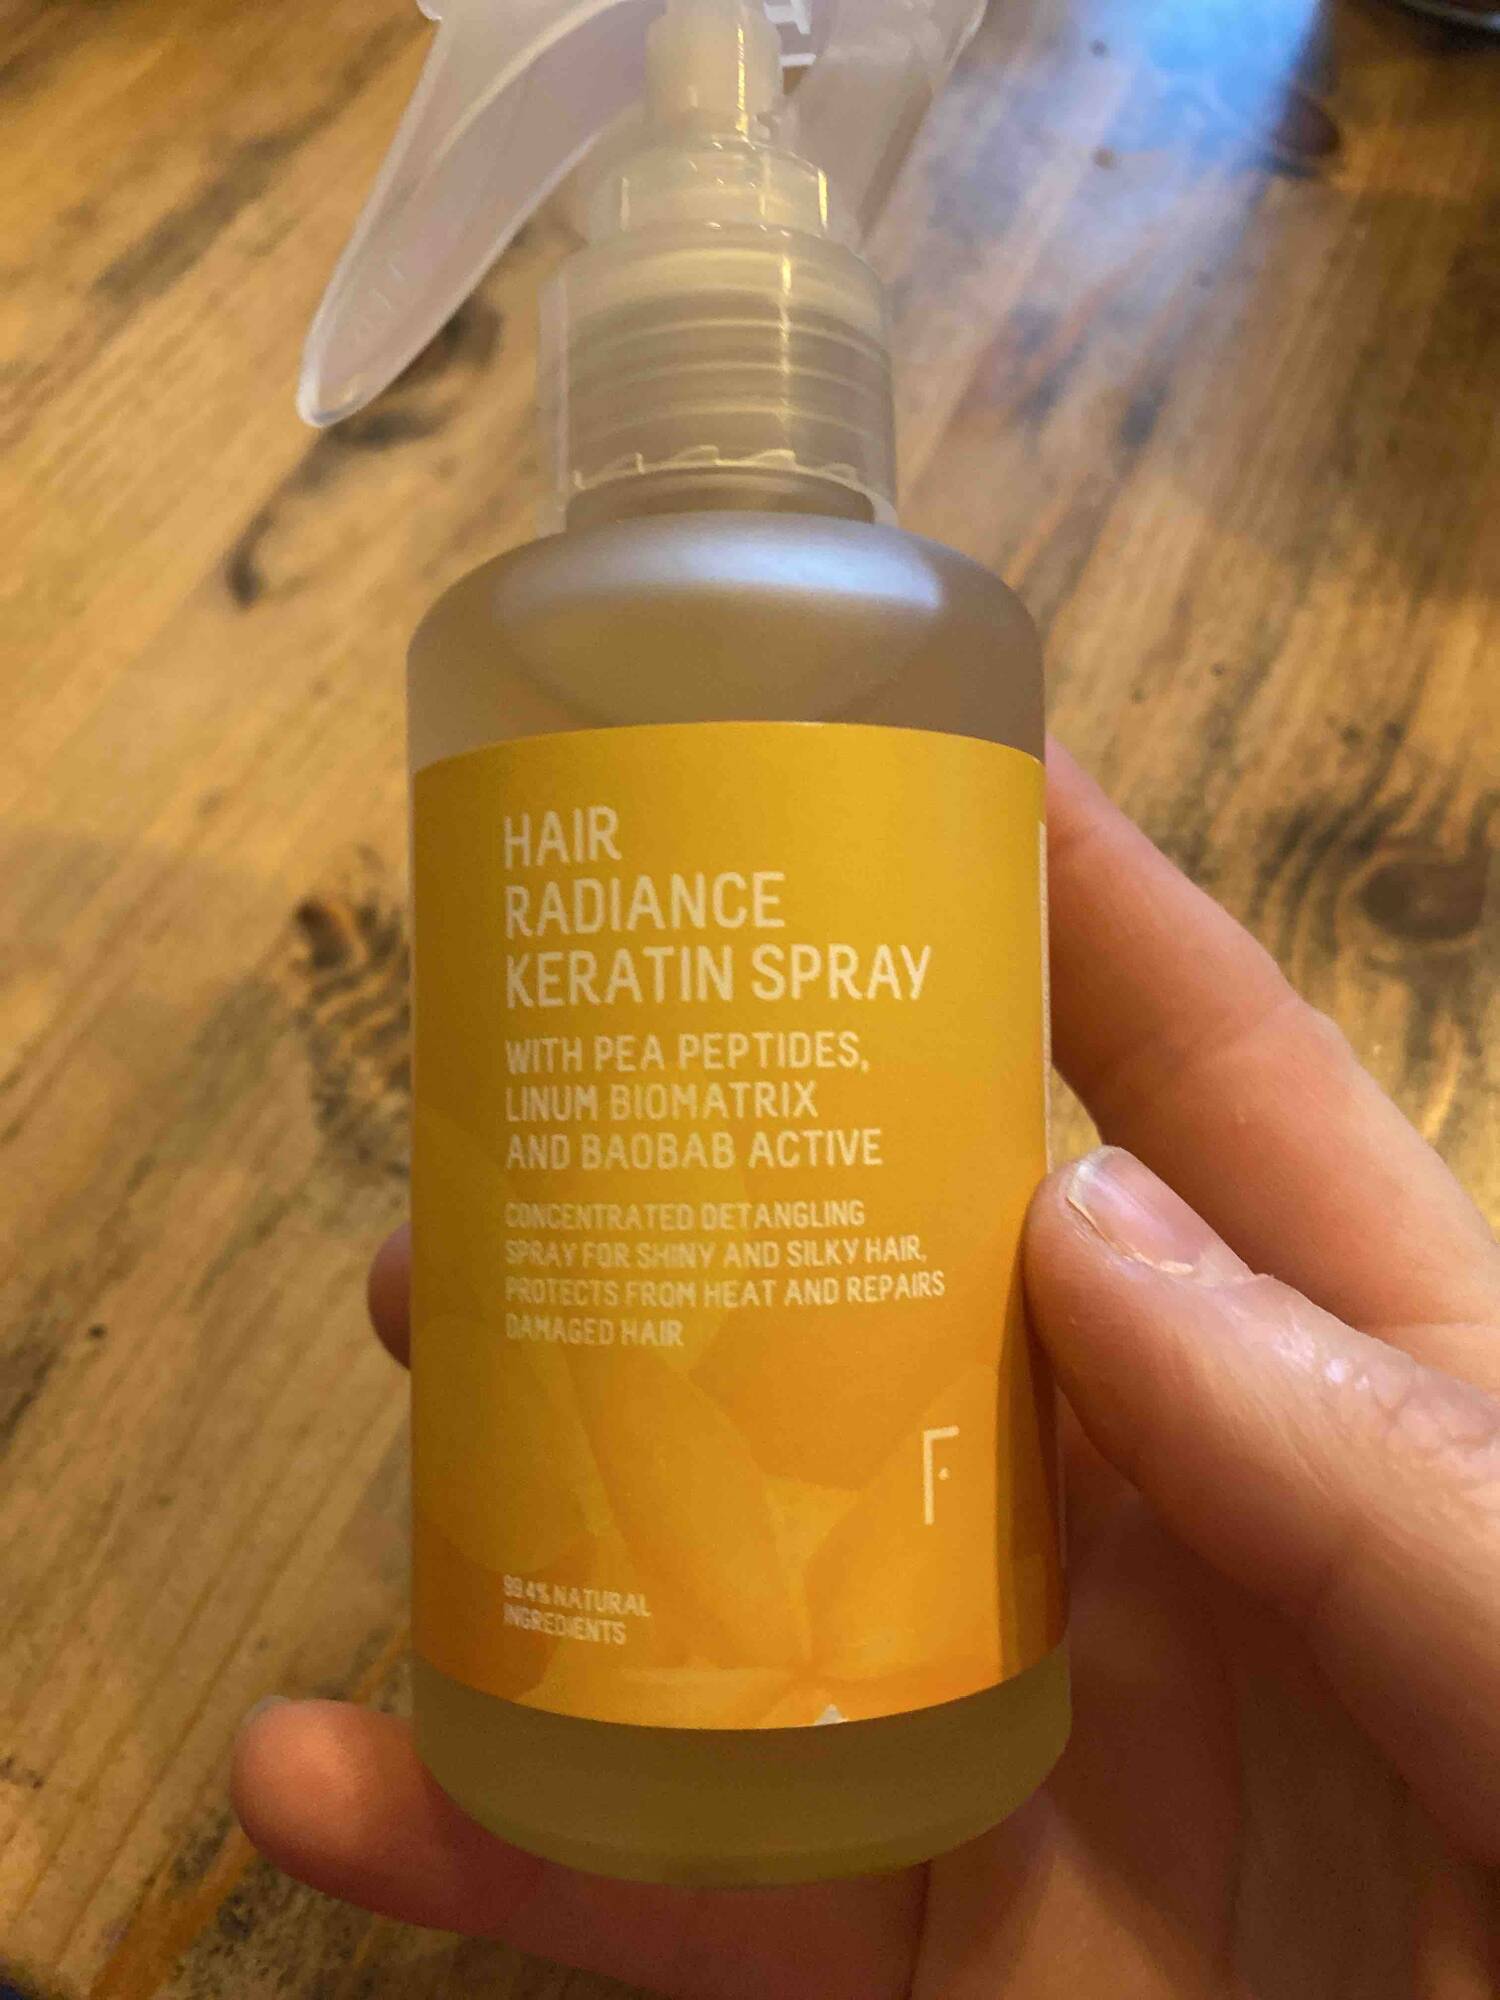 FRESHLY COSMETICS - Hair radiance keratin spray Concentrated detangling